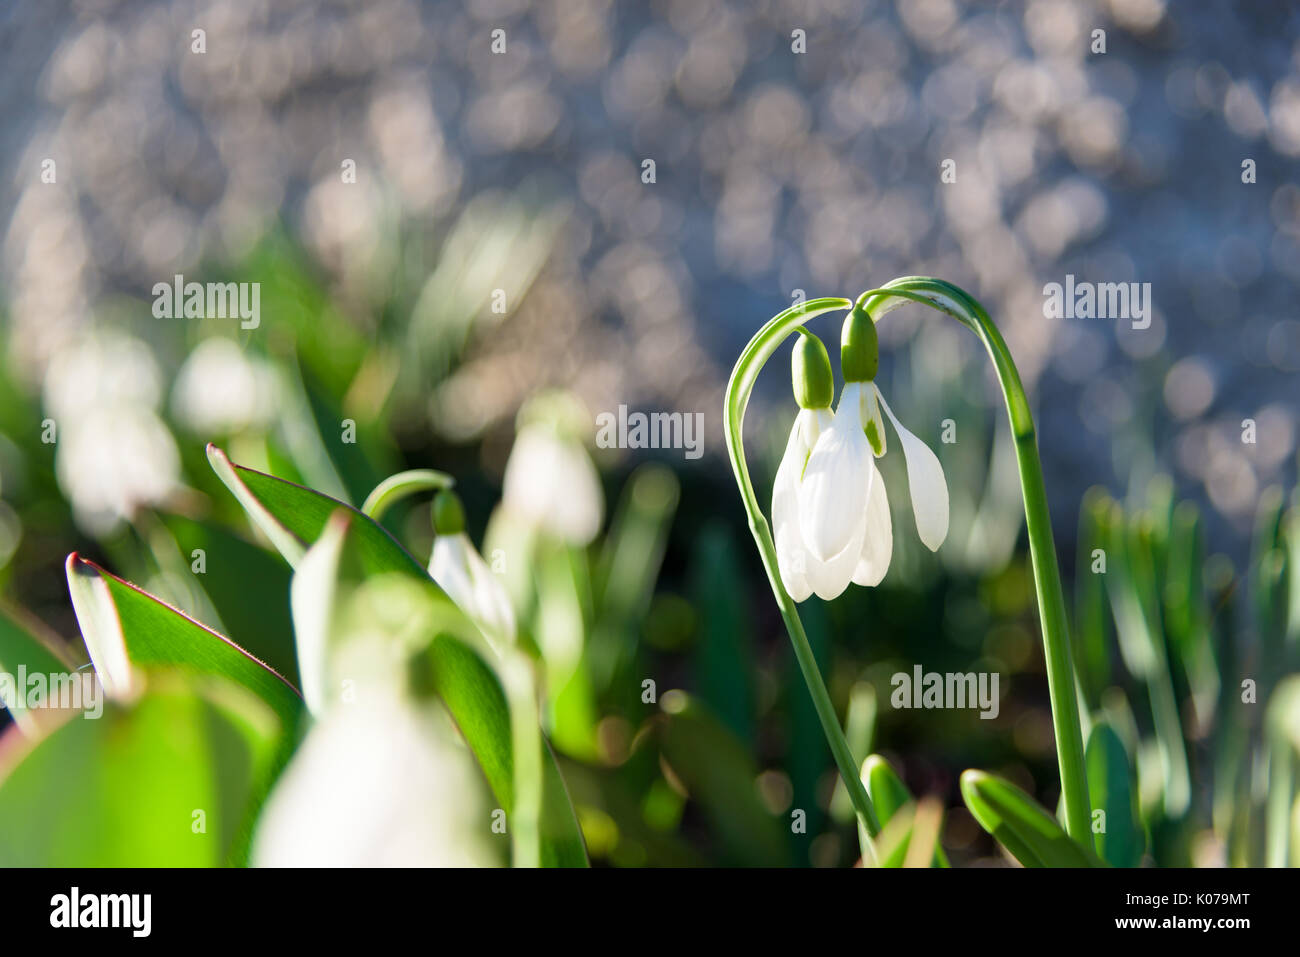 Two snowdrops spring flowers Stock Photo